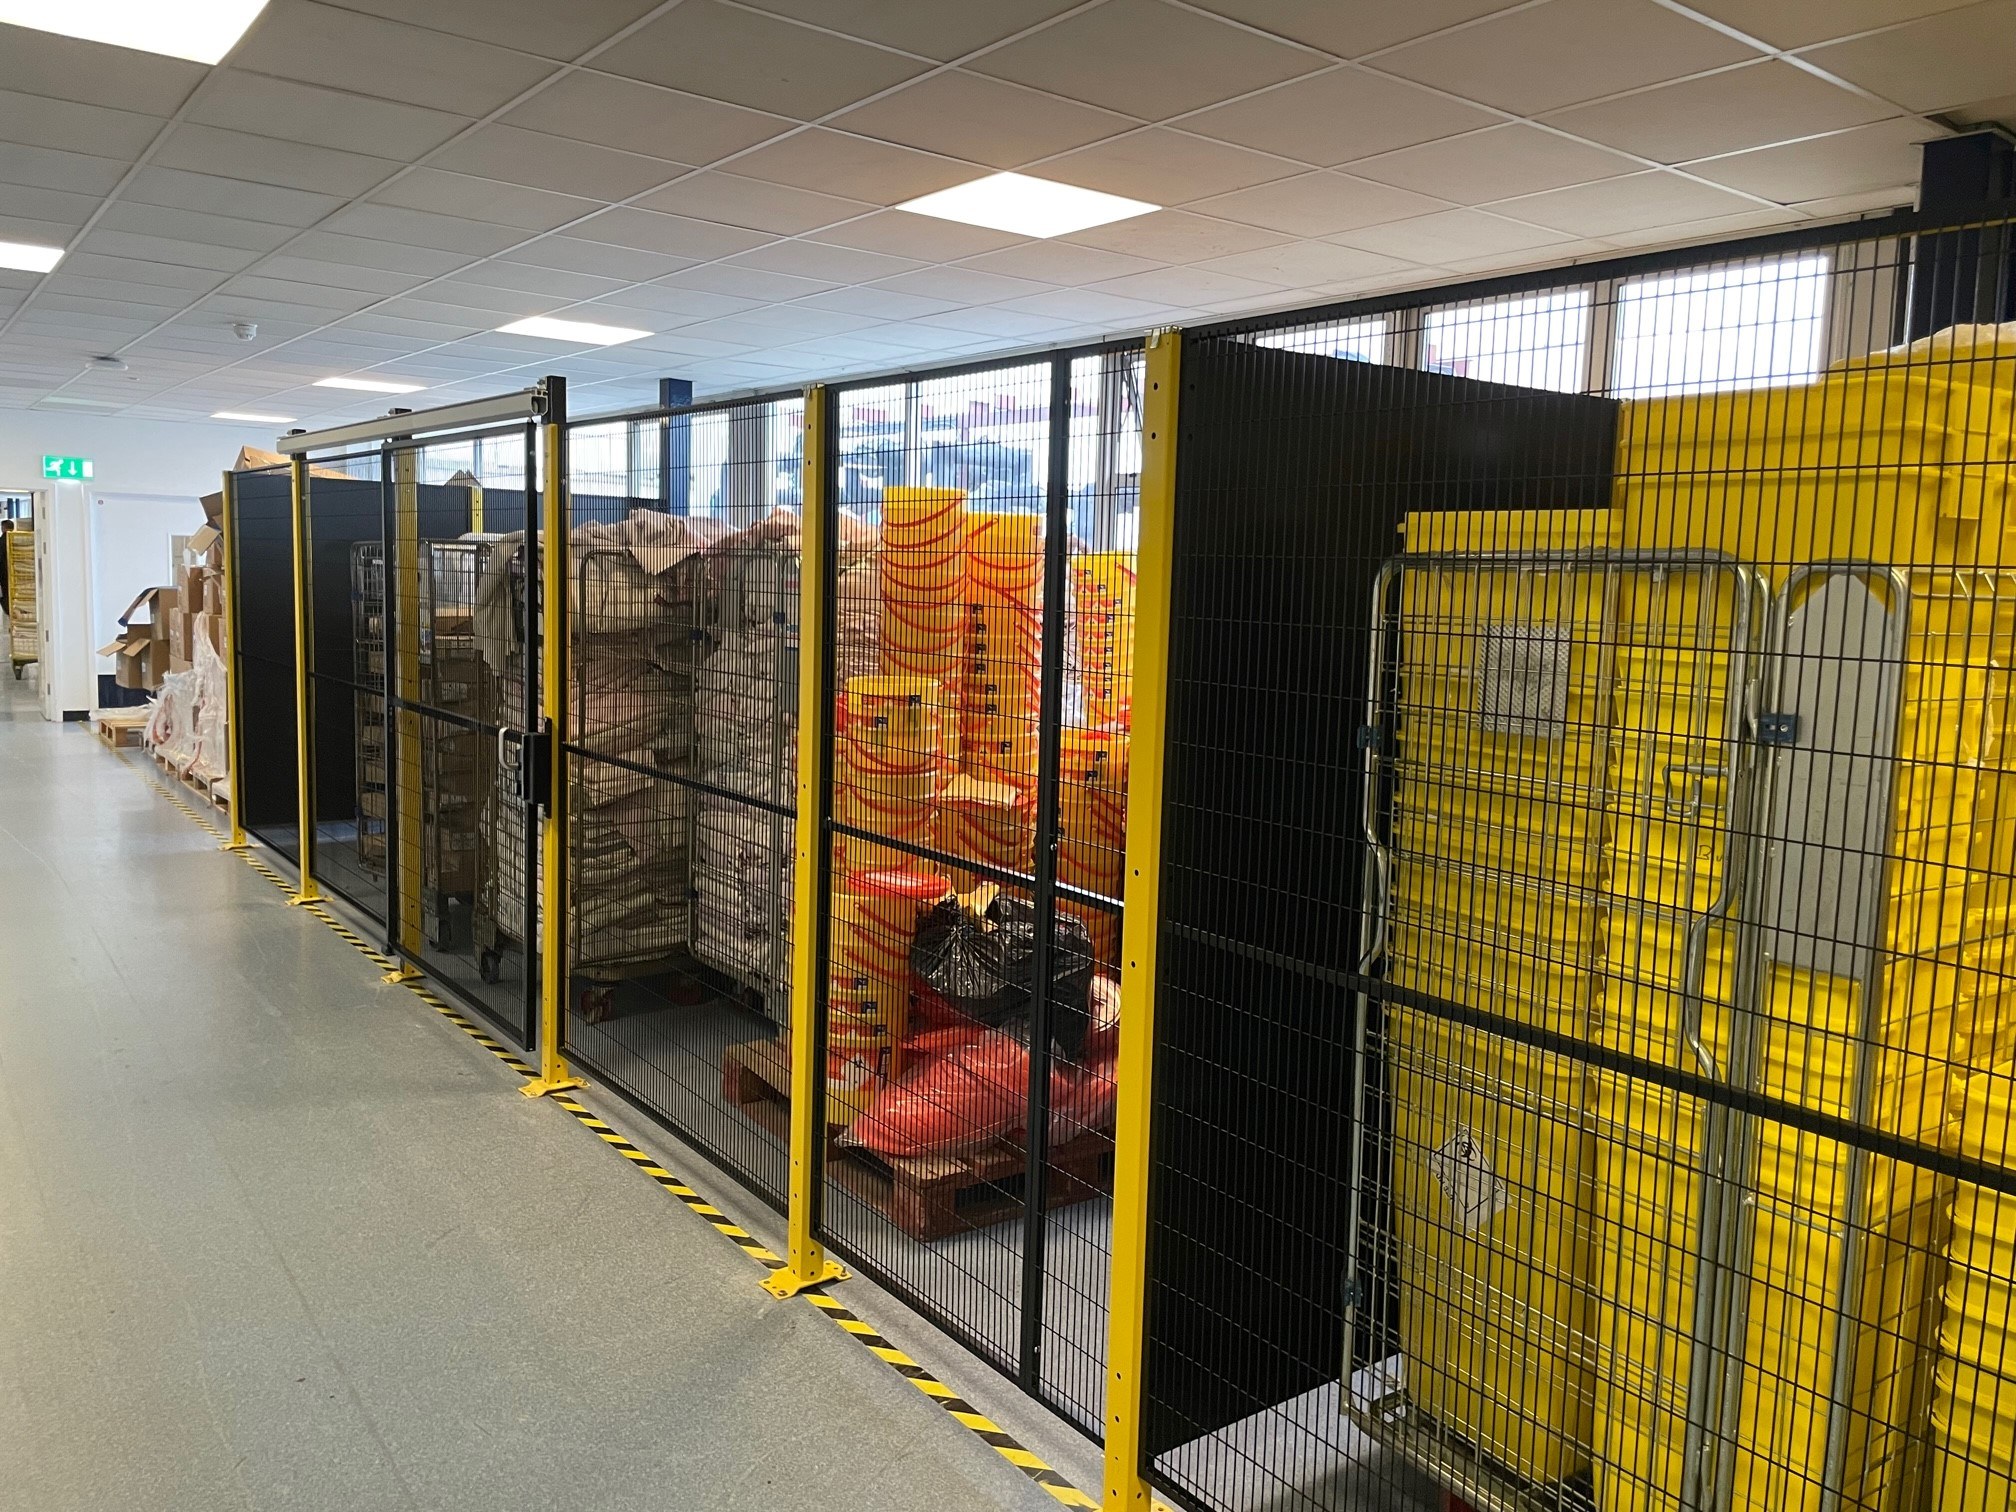 Suppliers of Secure Cage Storage Solutions